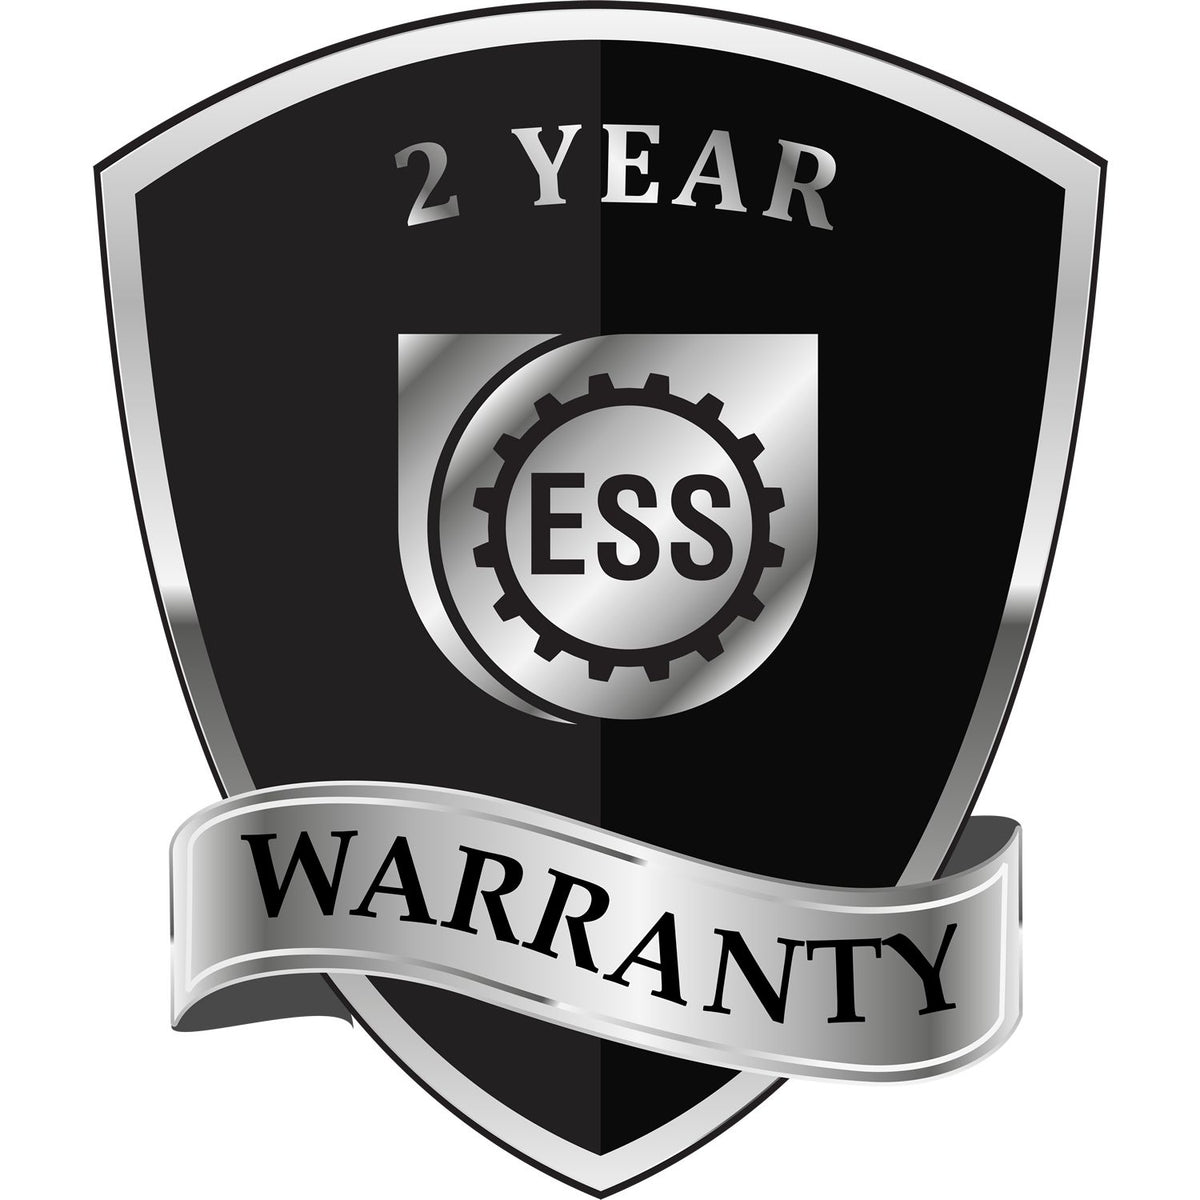 A black and silver badge or emblem showing warranty information for the Soft Montana Professional Geologist Seal